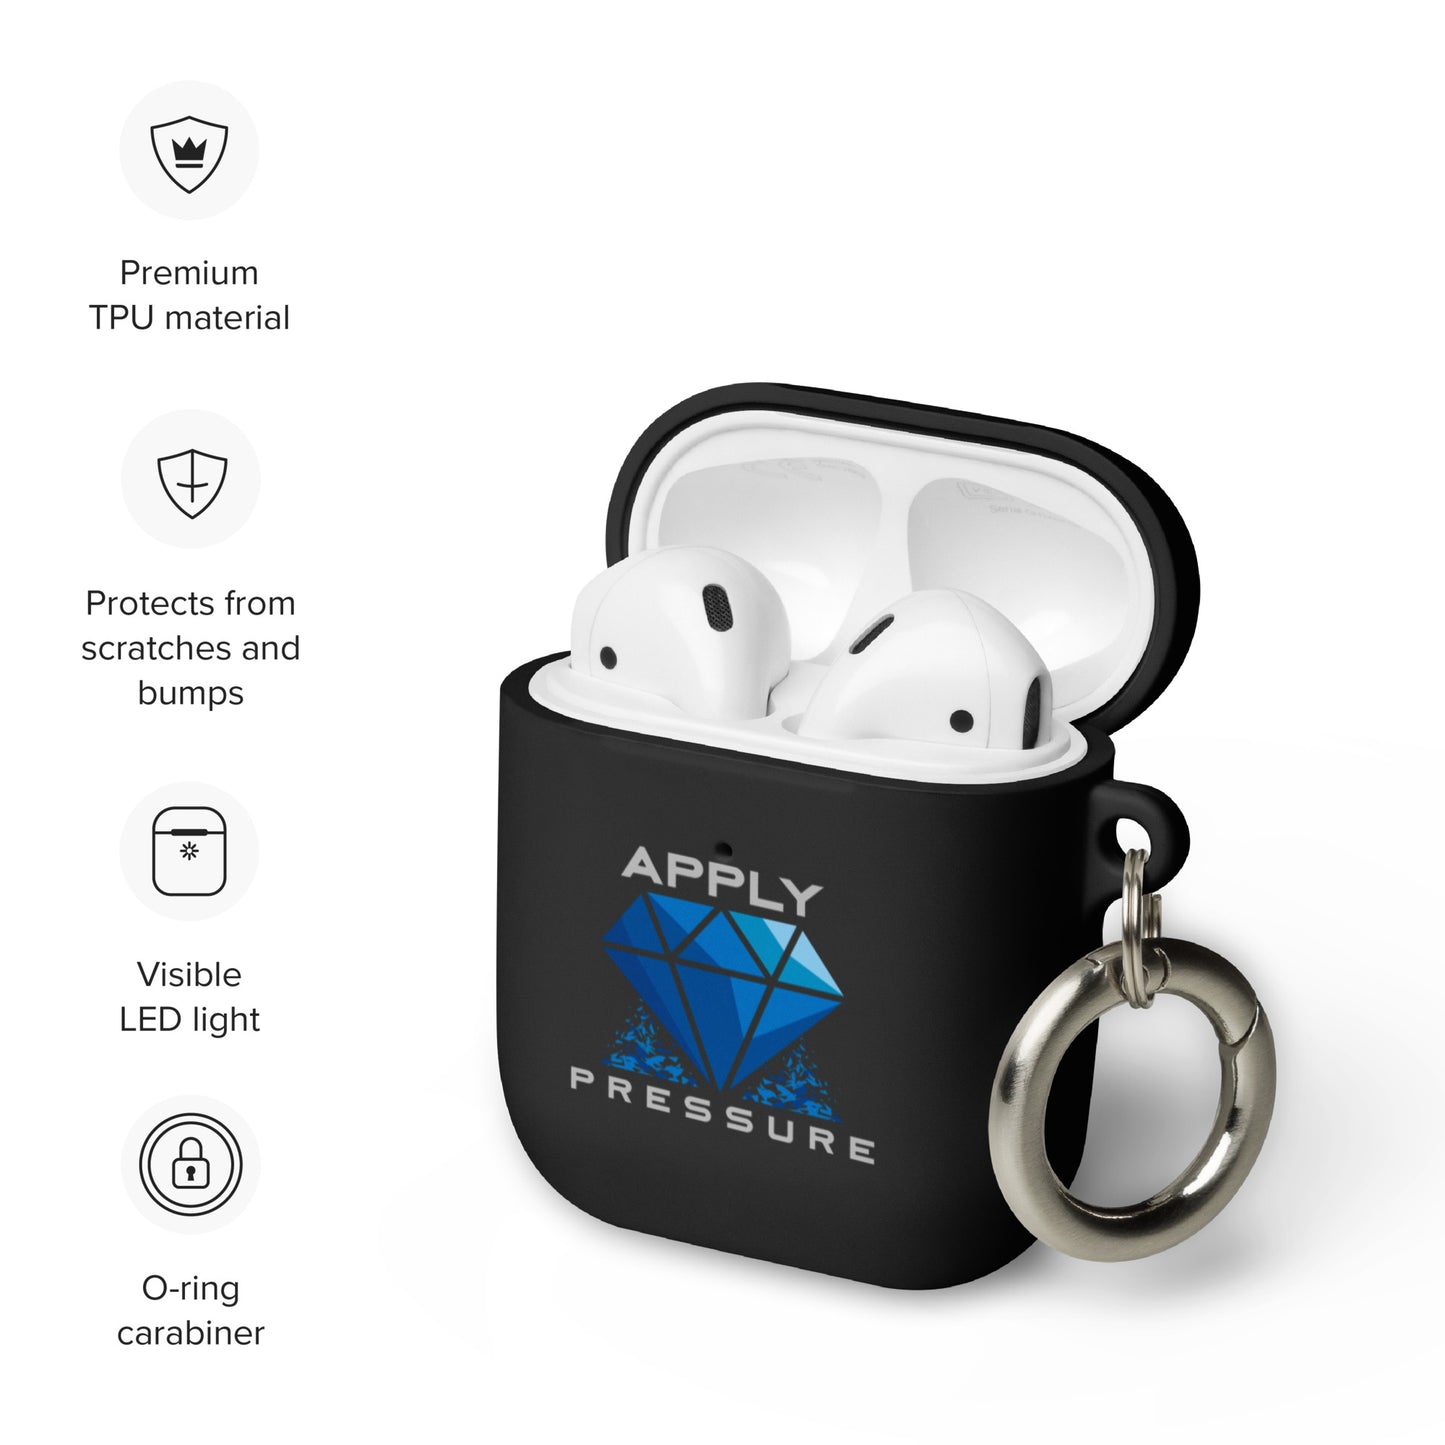 "SHATTER YOUR LIMITATIONS" AirPods case - Apply Pressure Fitness